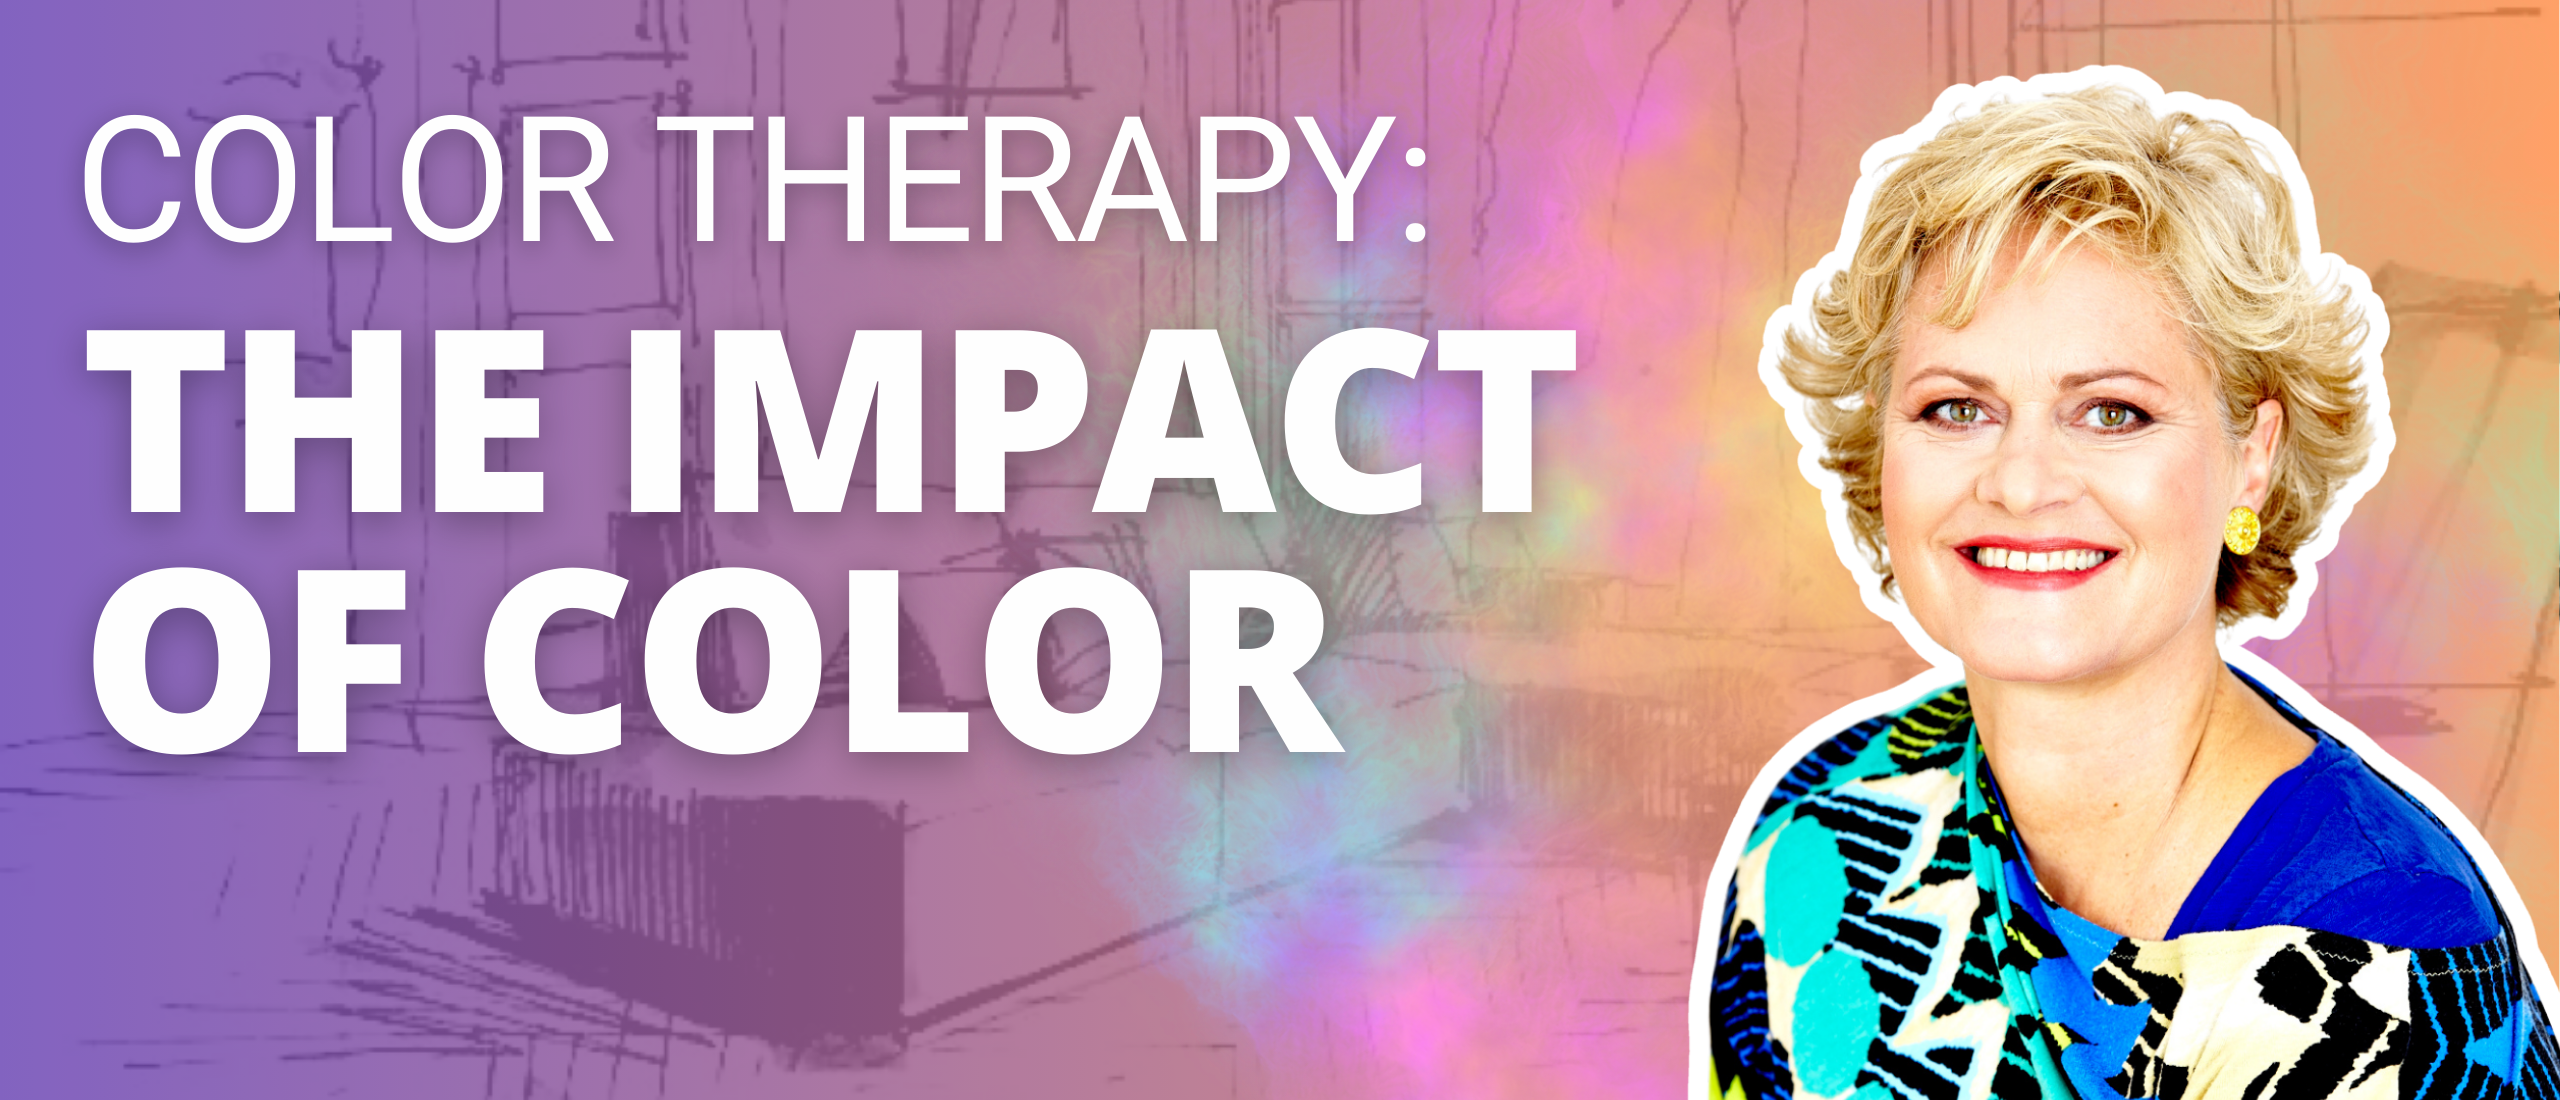 Color Therapy: Impact Levels of Color - with Gabrielle Buresch-Teichmann